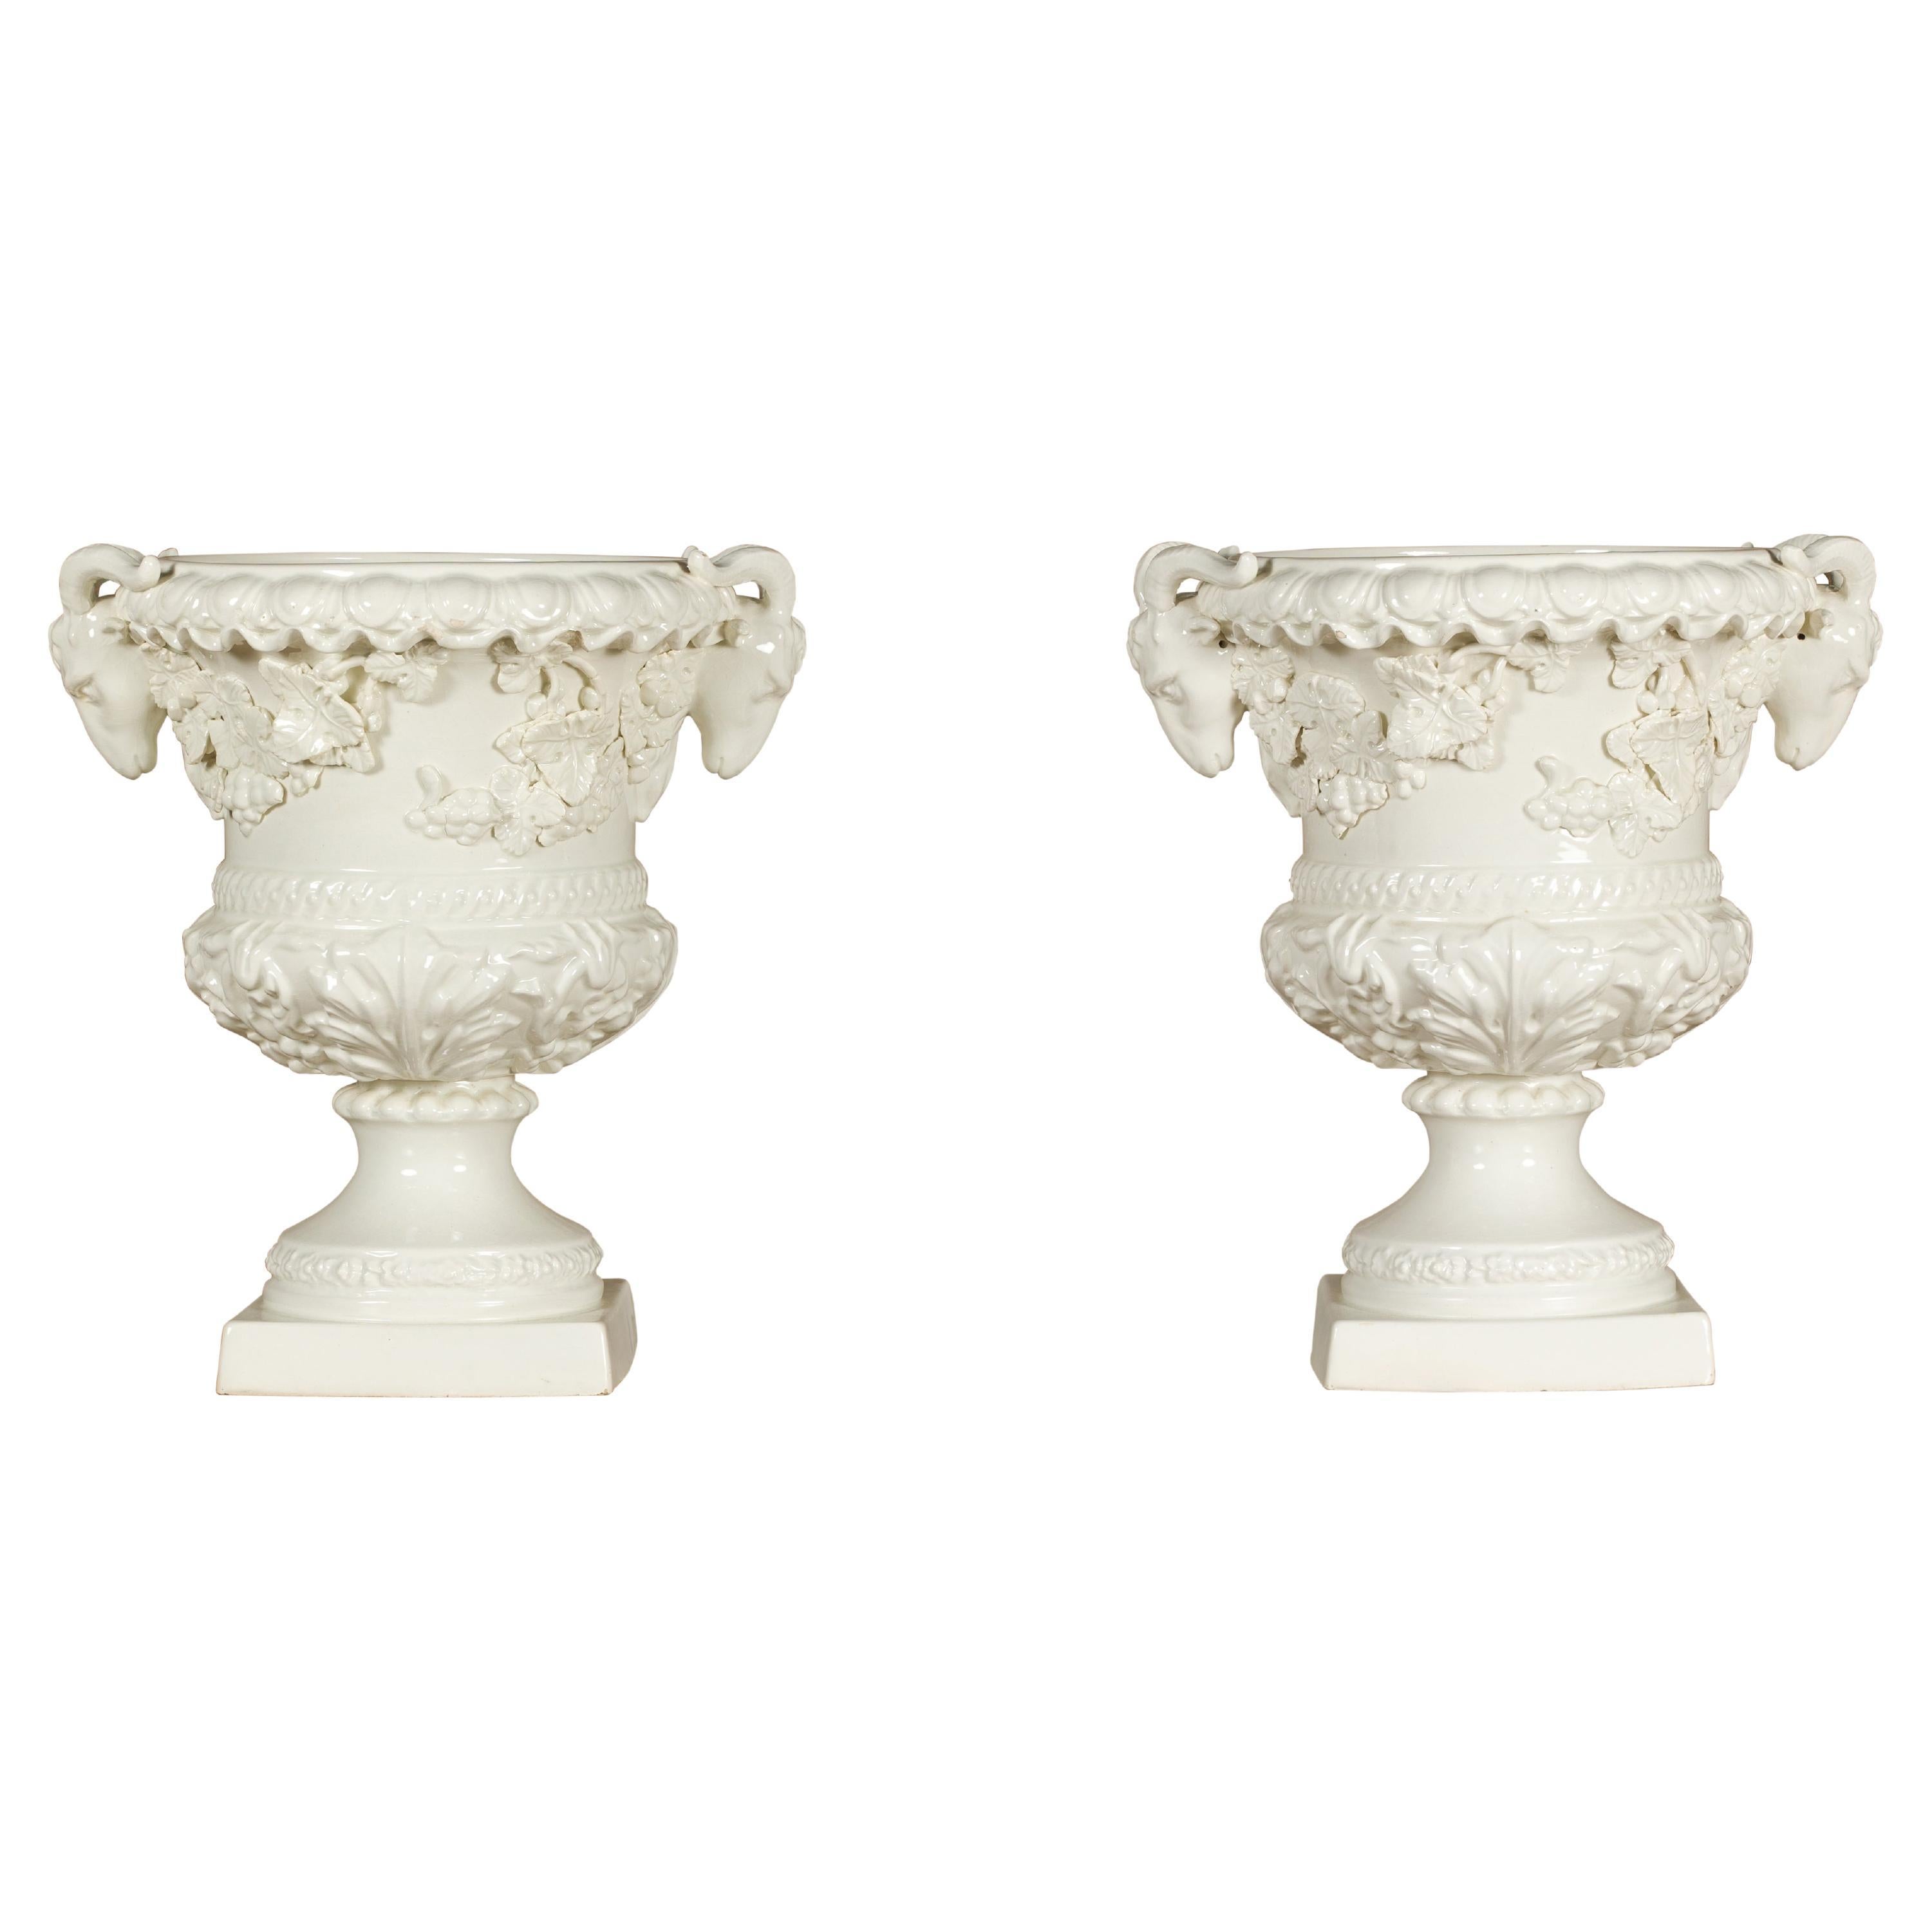 Pair of Blanc de Chine Midcentury Urns with Rams Heads and Ivy Leaves